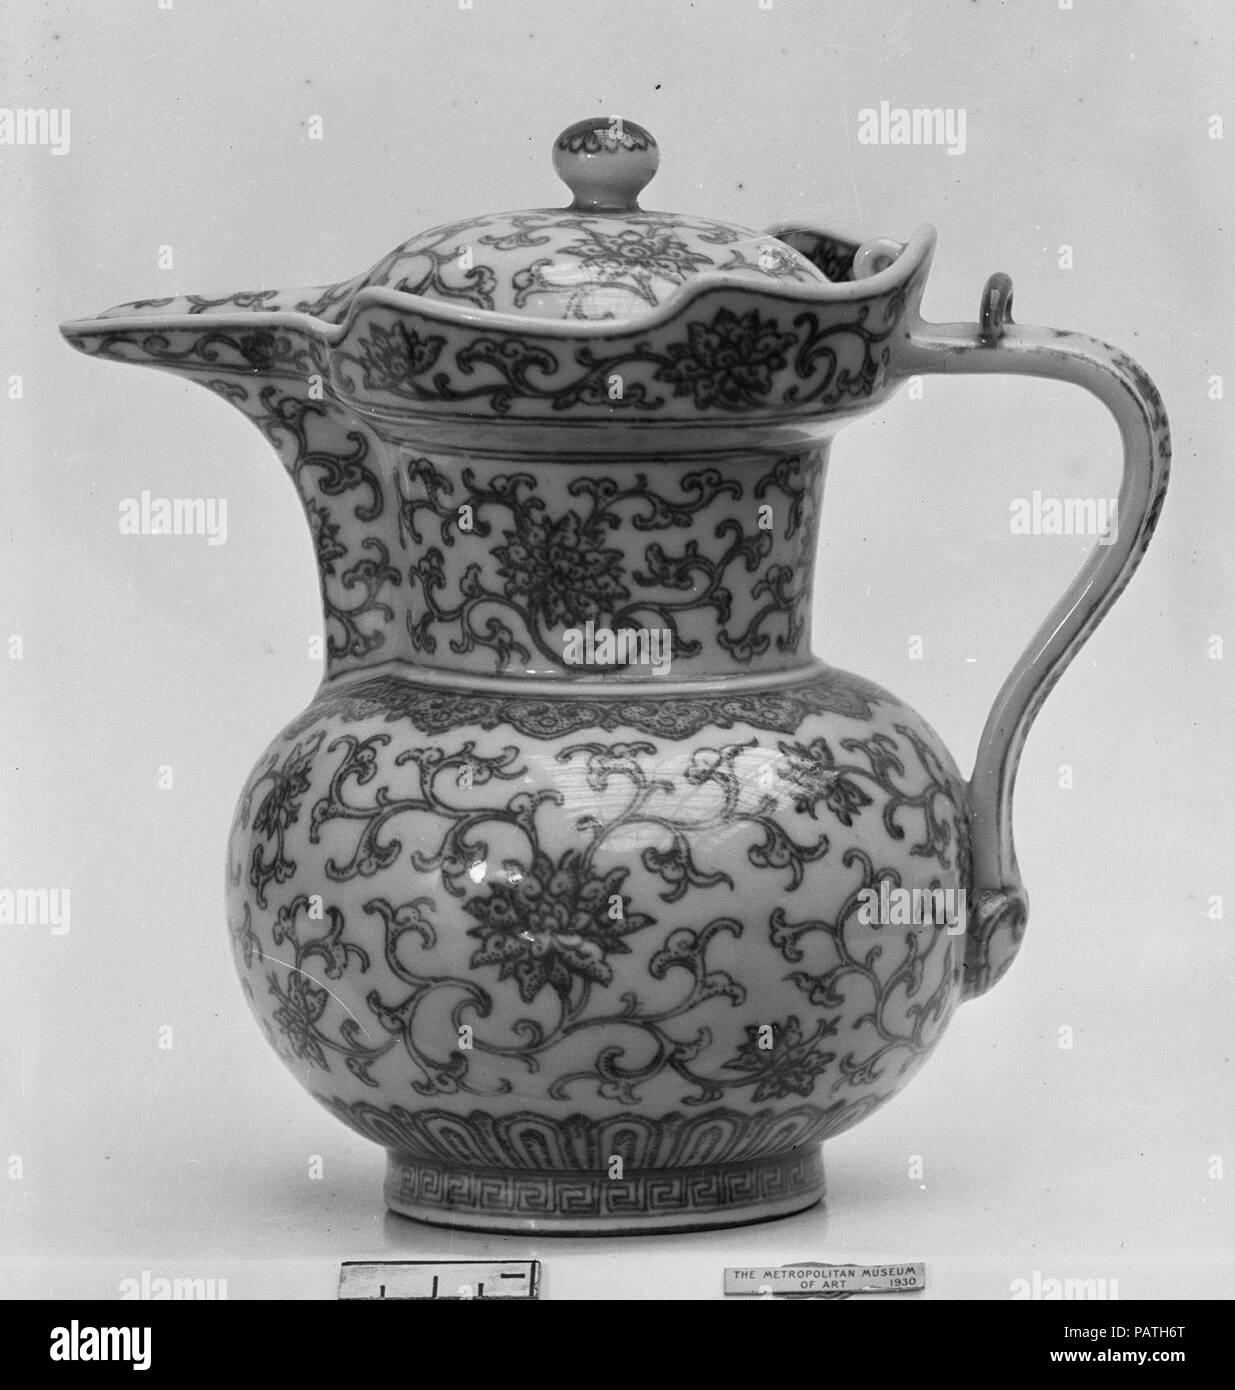 Ewer in Shape of Tibetan Monk's Cap. Culture: China. Dimensions: H. with cover: 5 3/4 in. (14.6 cm); Diam. 3 3/4 in. (9.5 cm). Date: mid-18th century.  This shape was introduced to the repertory of Chinese ceramics in the fourteenth century due in part to the prominence of Tibetan monks and practices at the Mongol Yuan (1271-1368) court. Museum: Metropolitan Museum of Art, New York, USA. Stock Photo